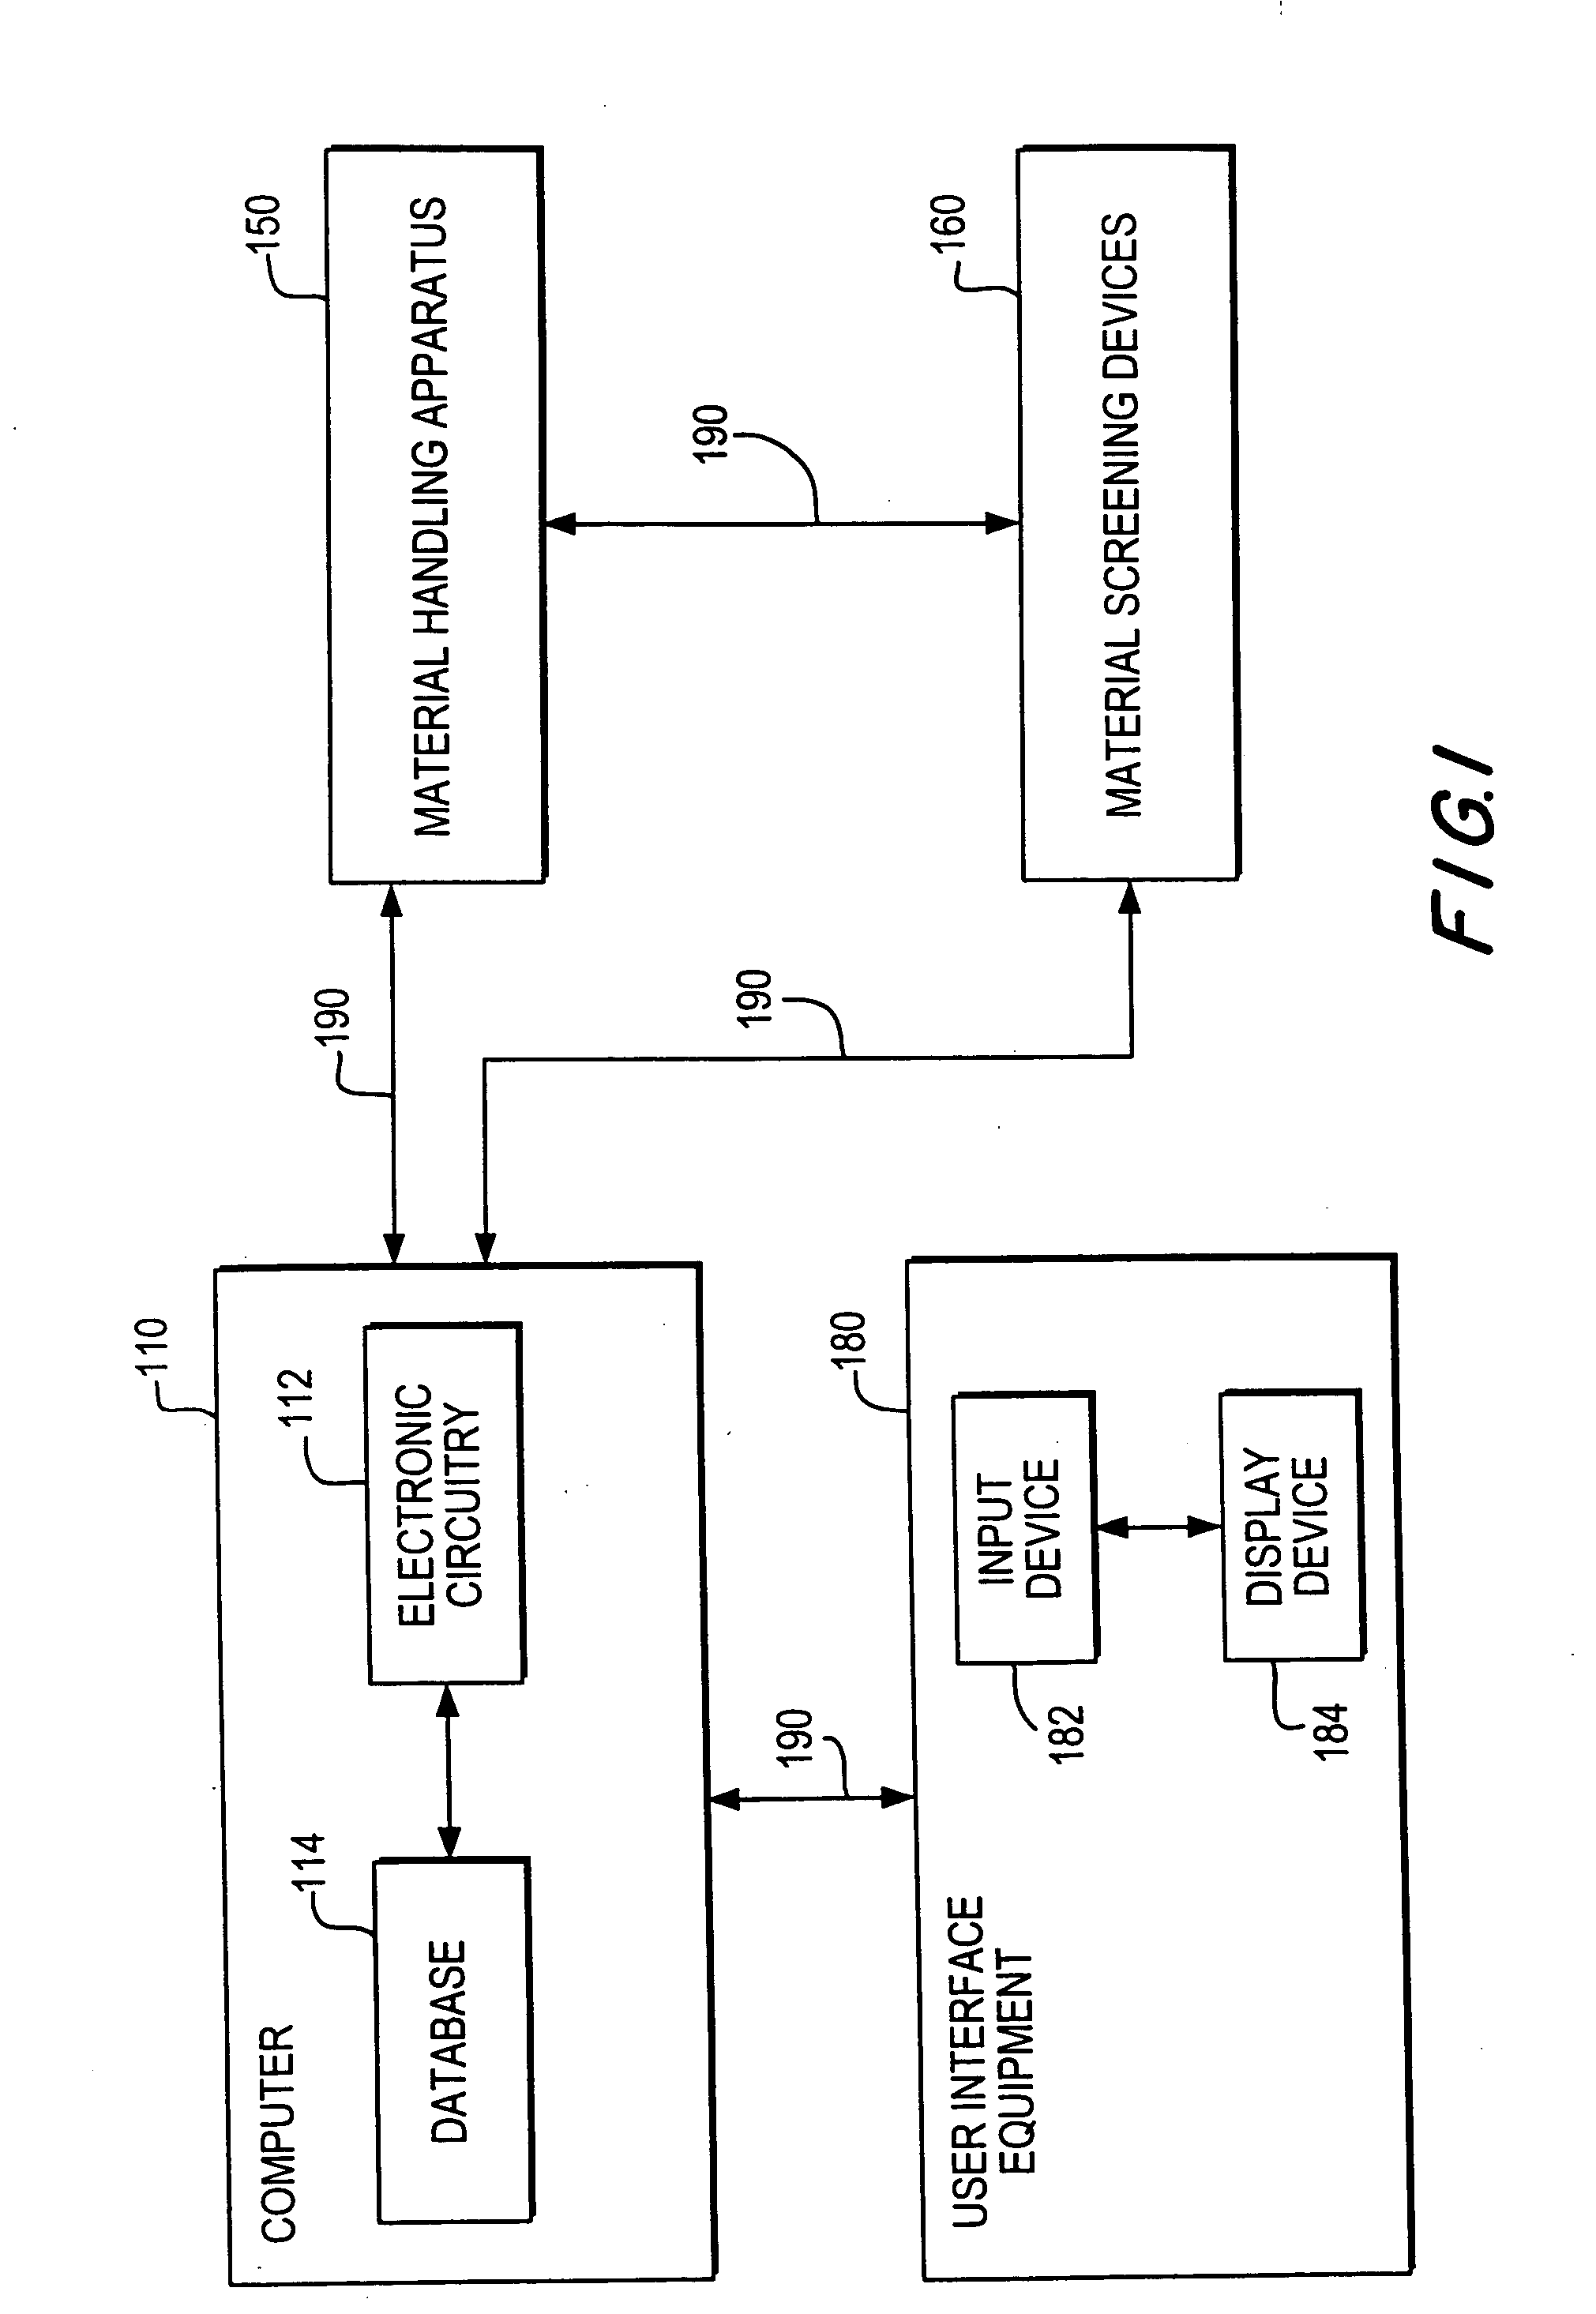 Apparatuses and methods for creating and testing pre-formulations and systems for same